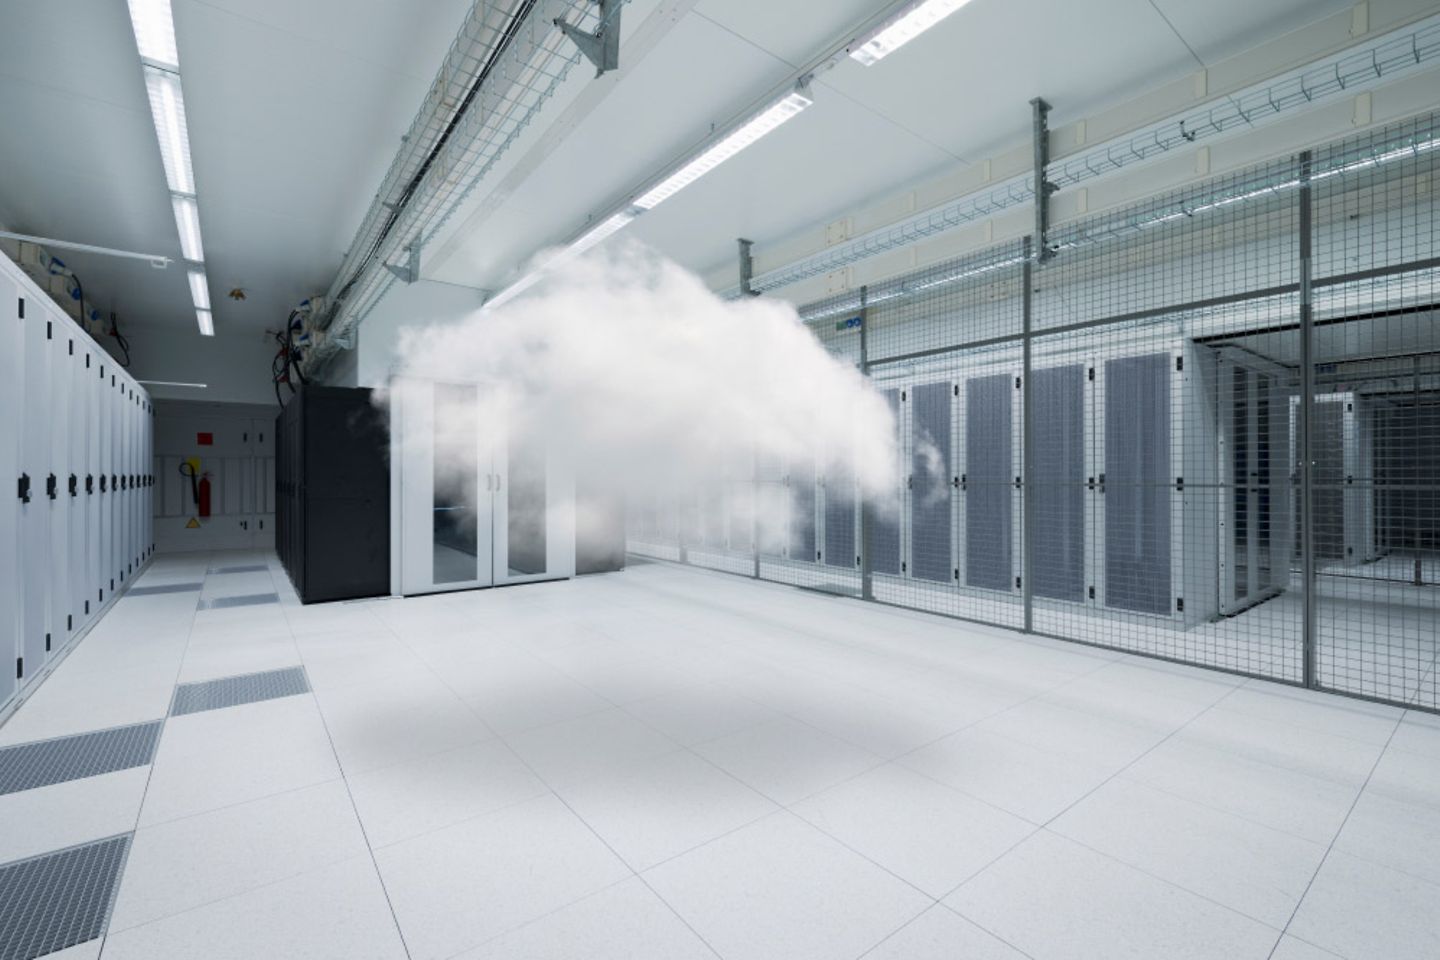 Server room with cloud floating in the room.